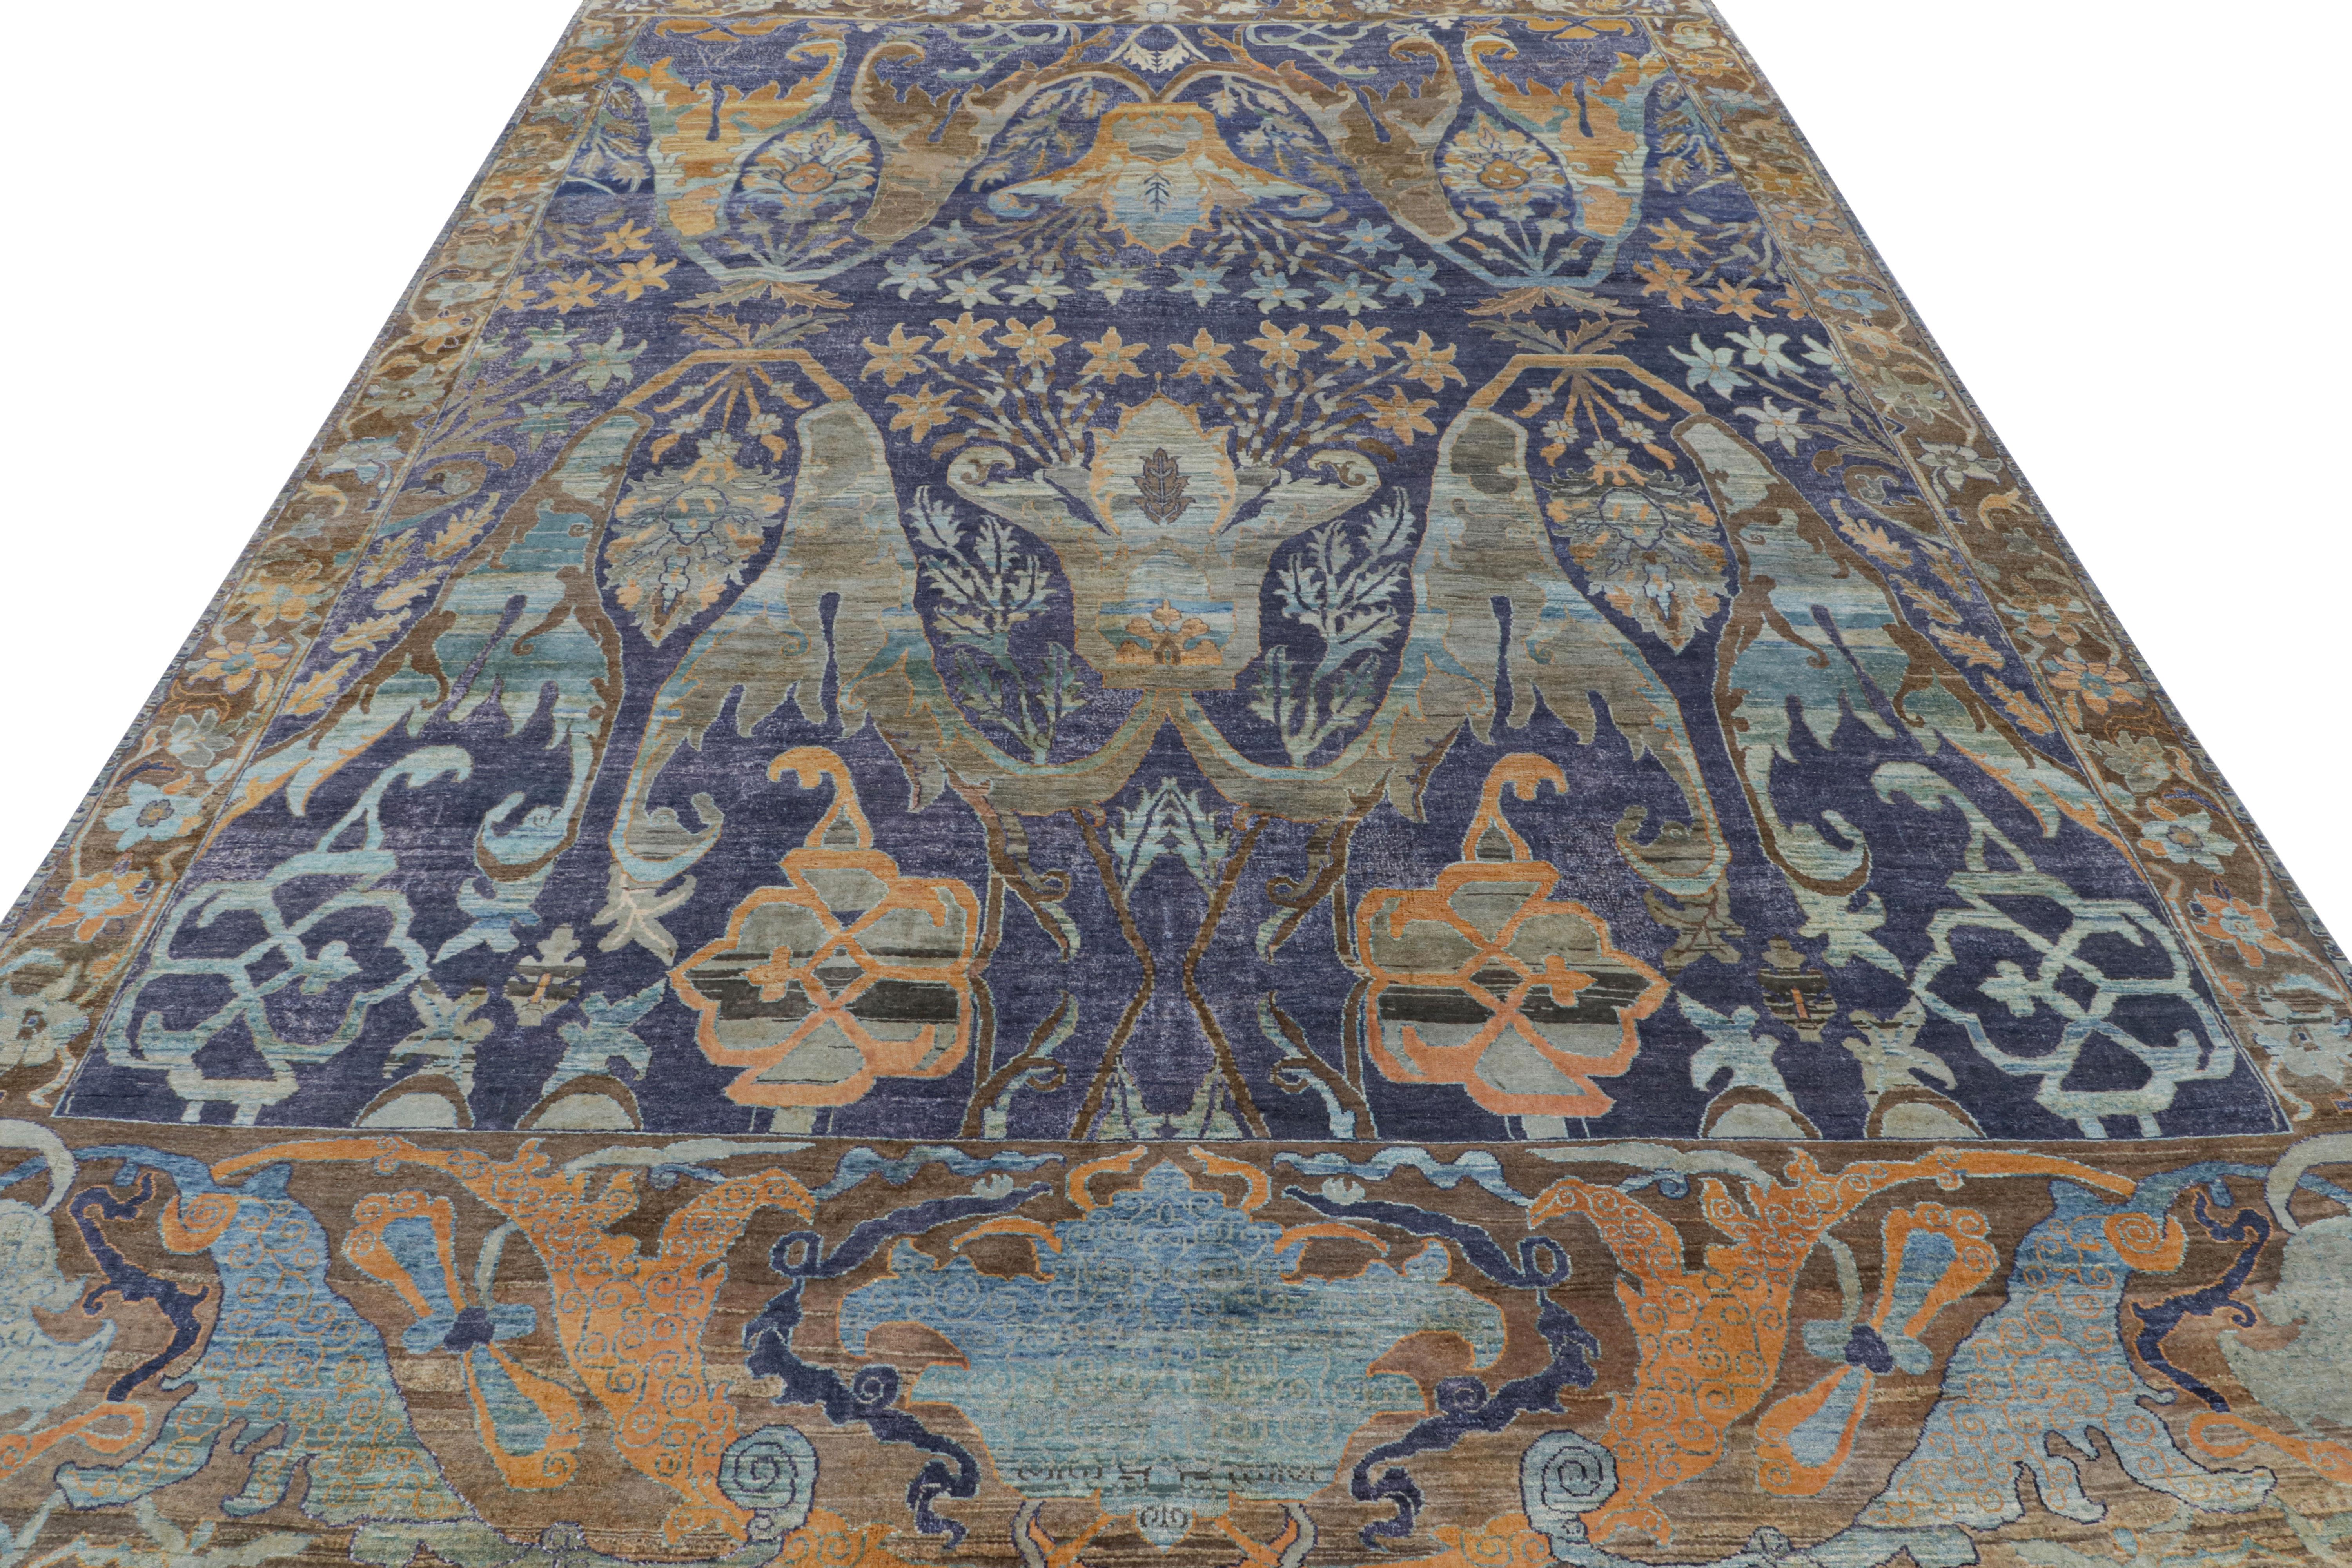 Indian Rug & Kilim’s Oushak-Style Rug in Indigo, Brown and Brown Floral Patterns For Sale